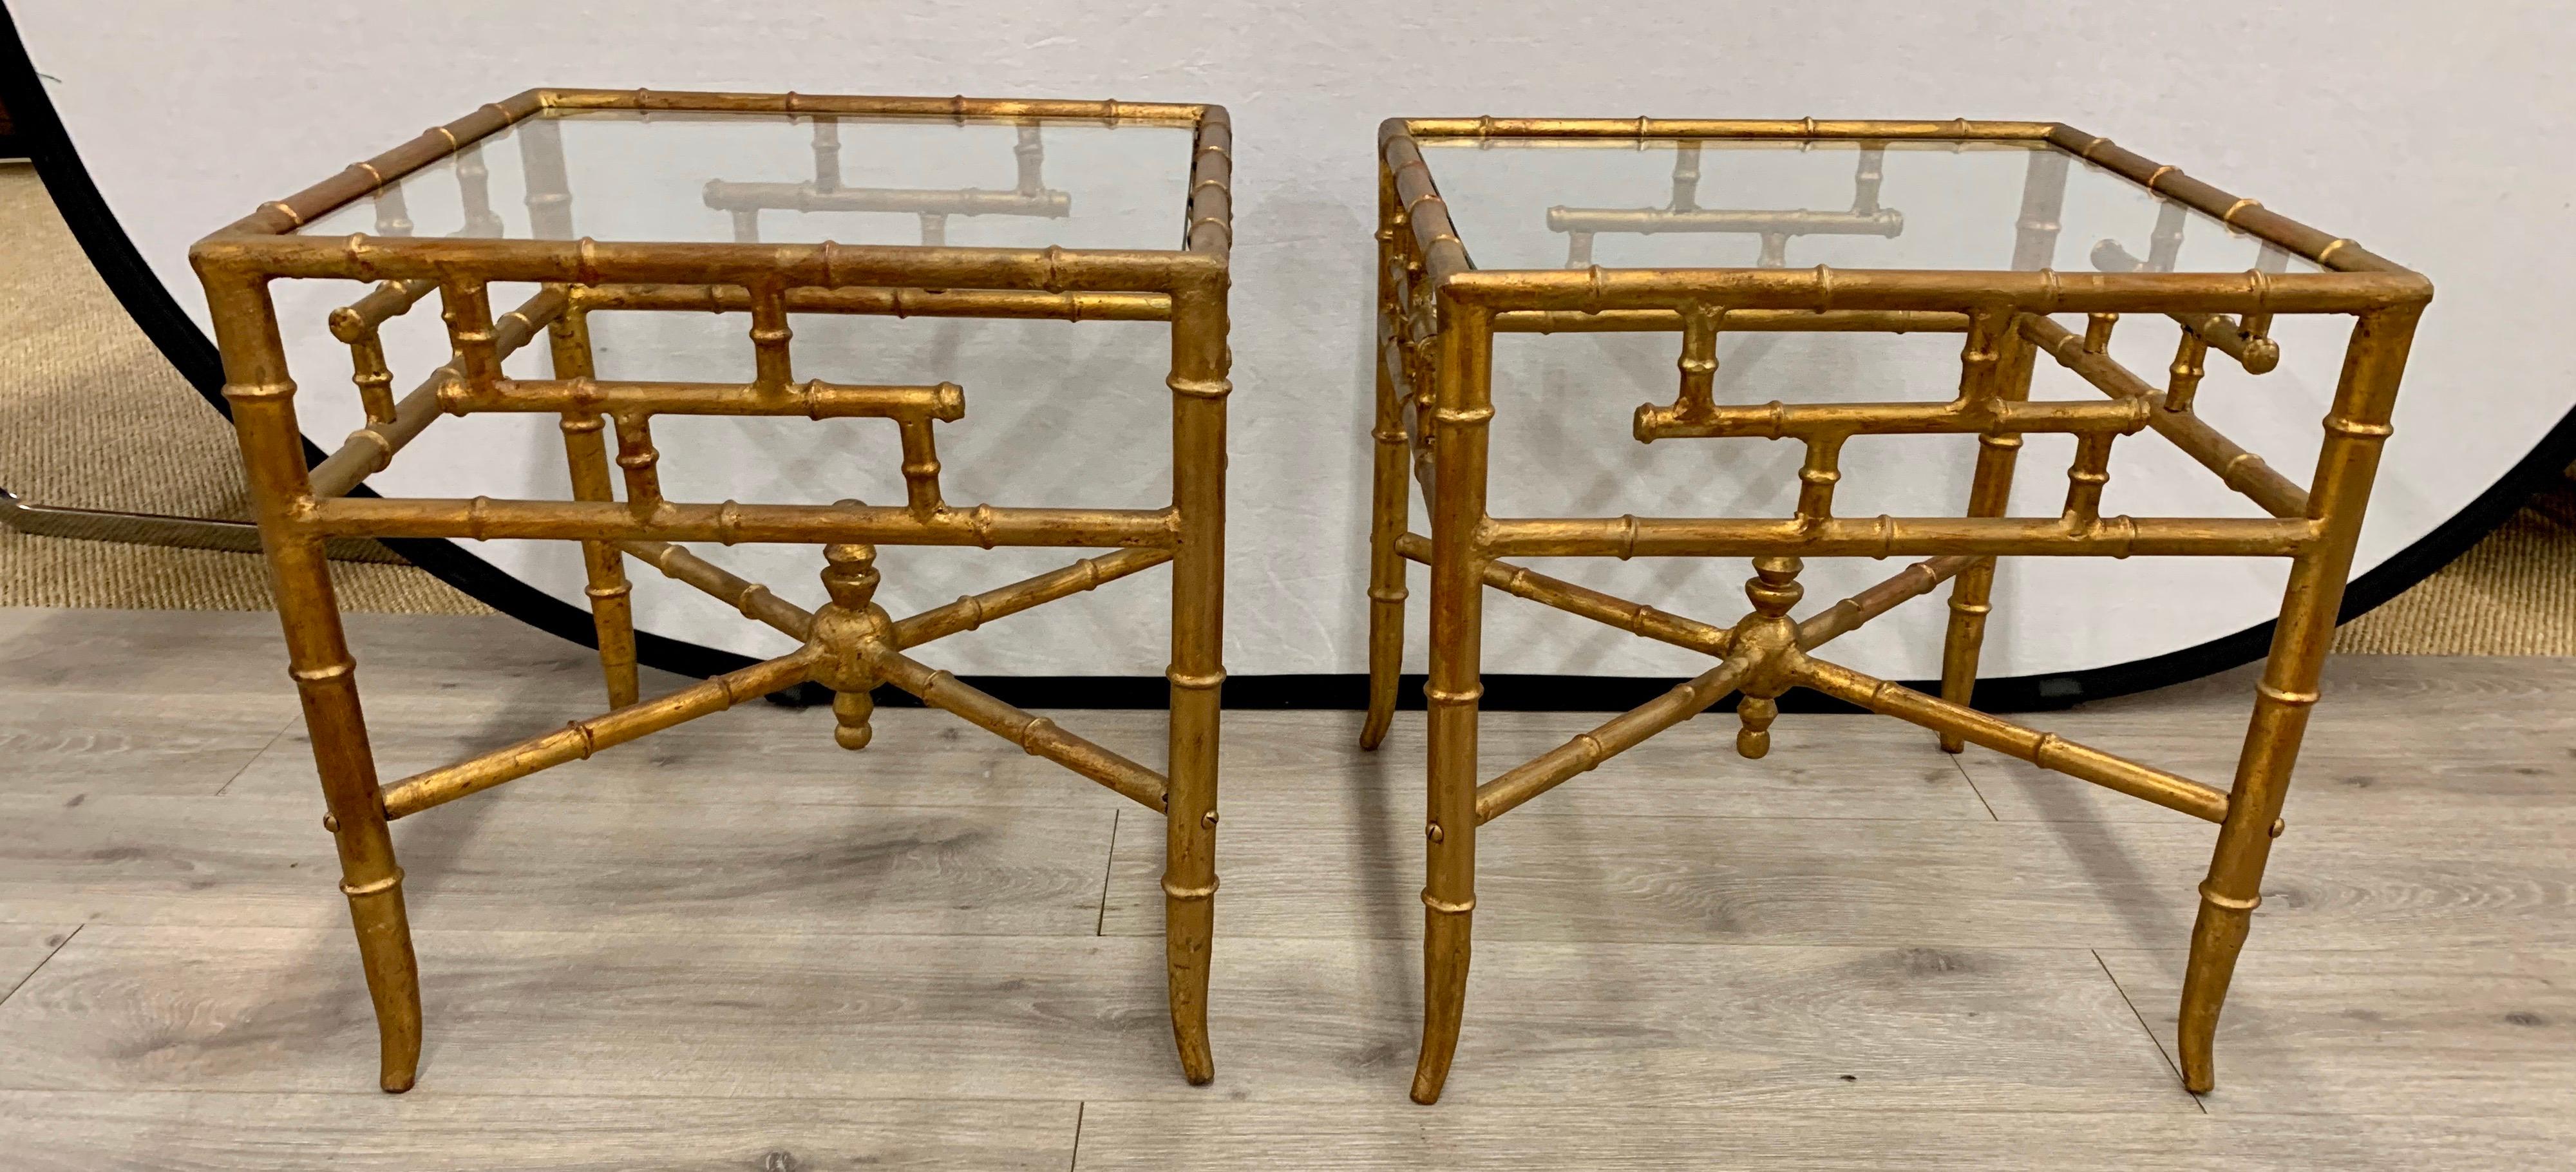 Pair of vintage faux bamboo Chinese Chippendale gilt side tables. Features glass tops and gilt all around.
Perfect in bedroom, study or living room.